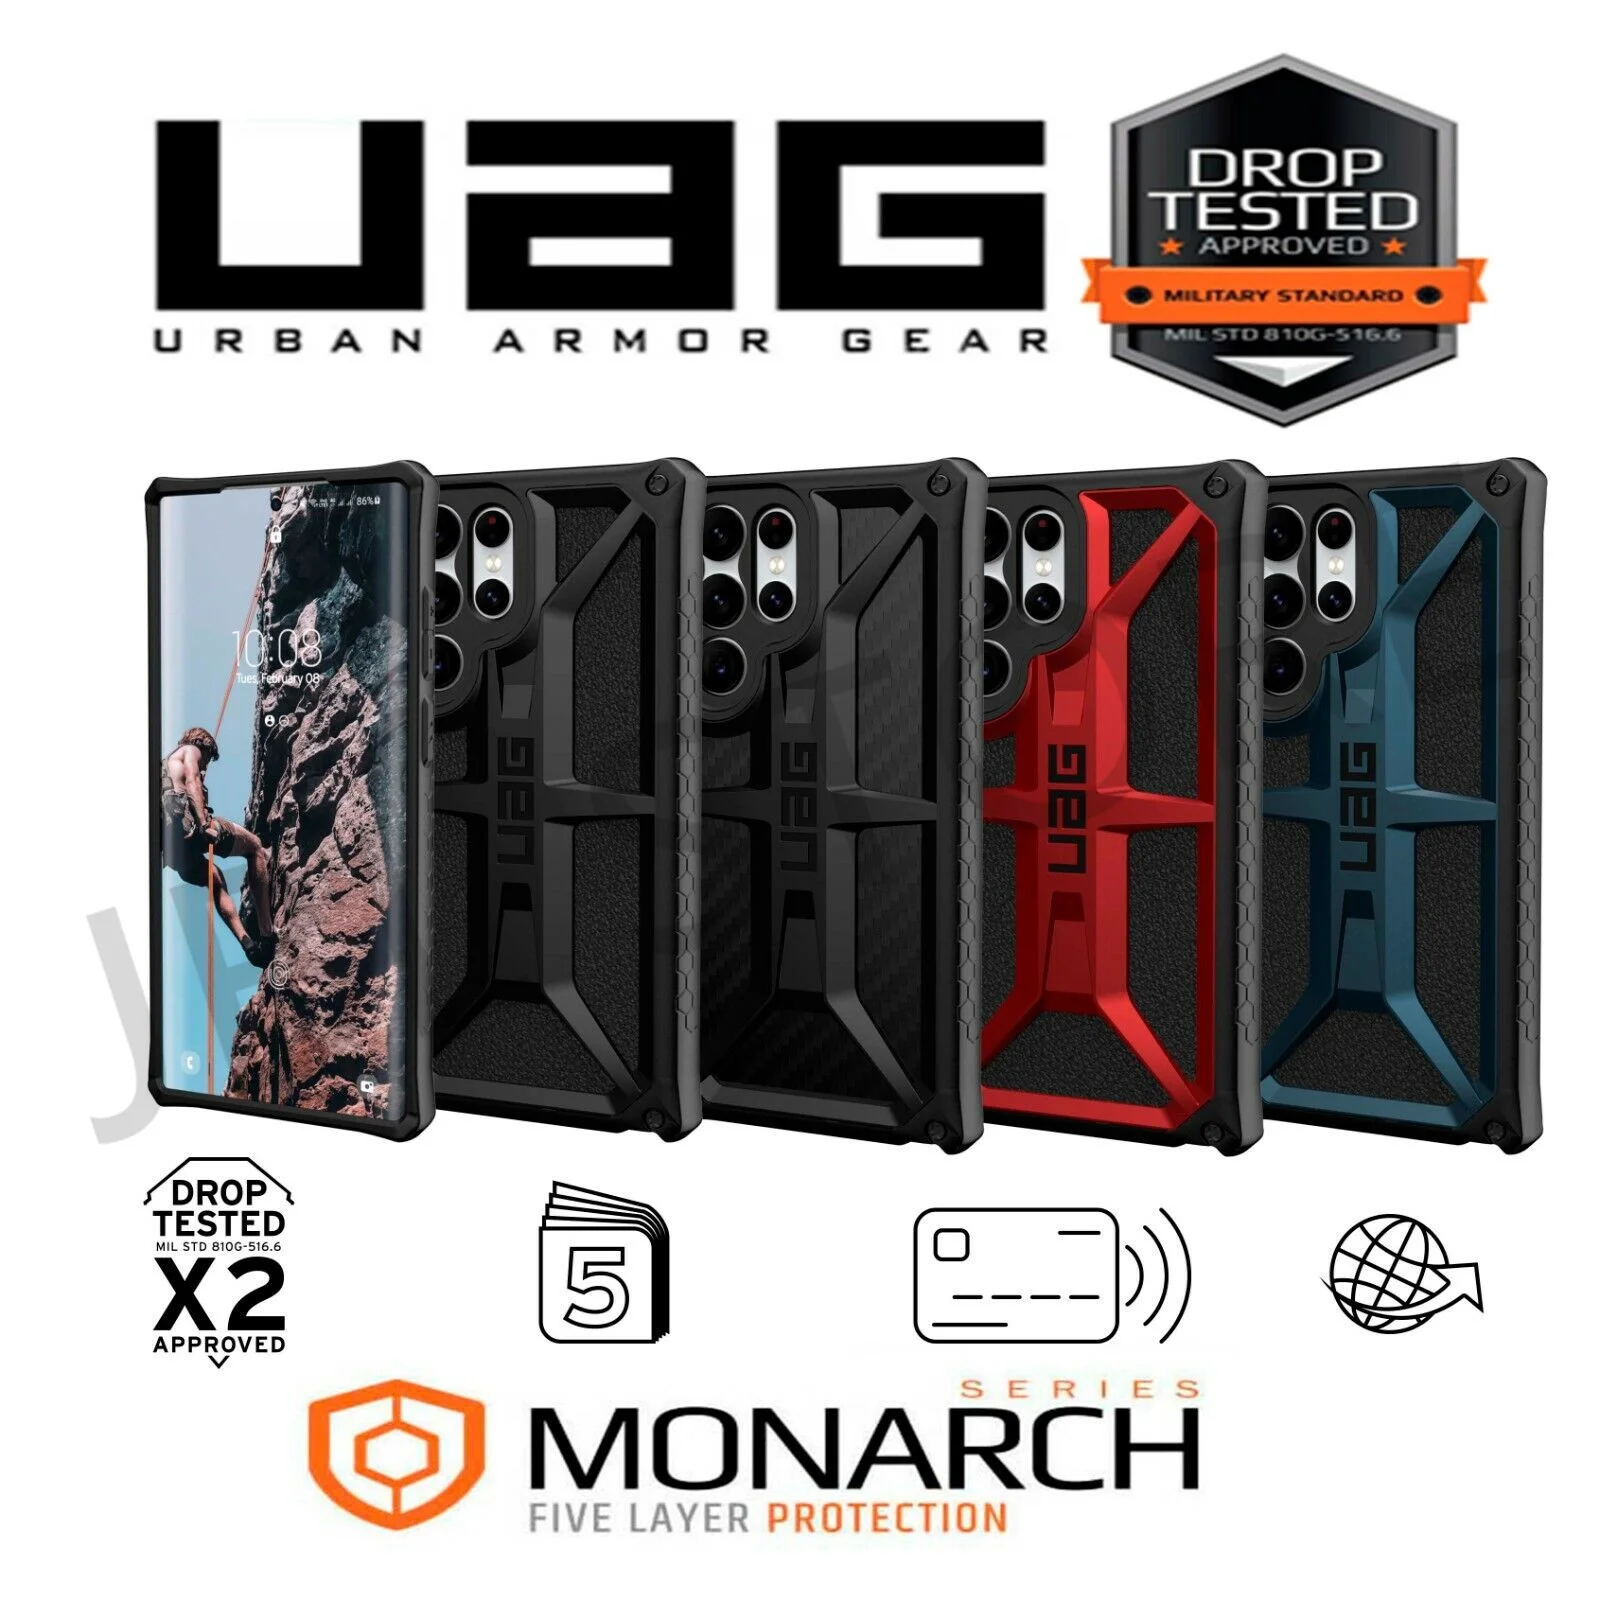 

Original UAG Monarch Case Samsung Galaxy S22 Ultra 5G S22 PLUS S22+ Case Rugged Protective Cover Leather URBAN ARMOR GEAR